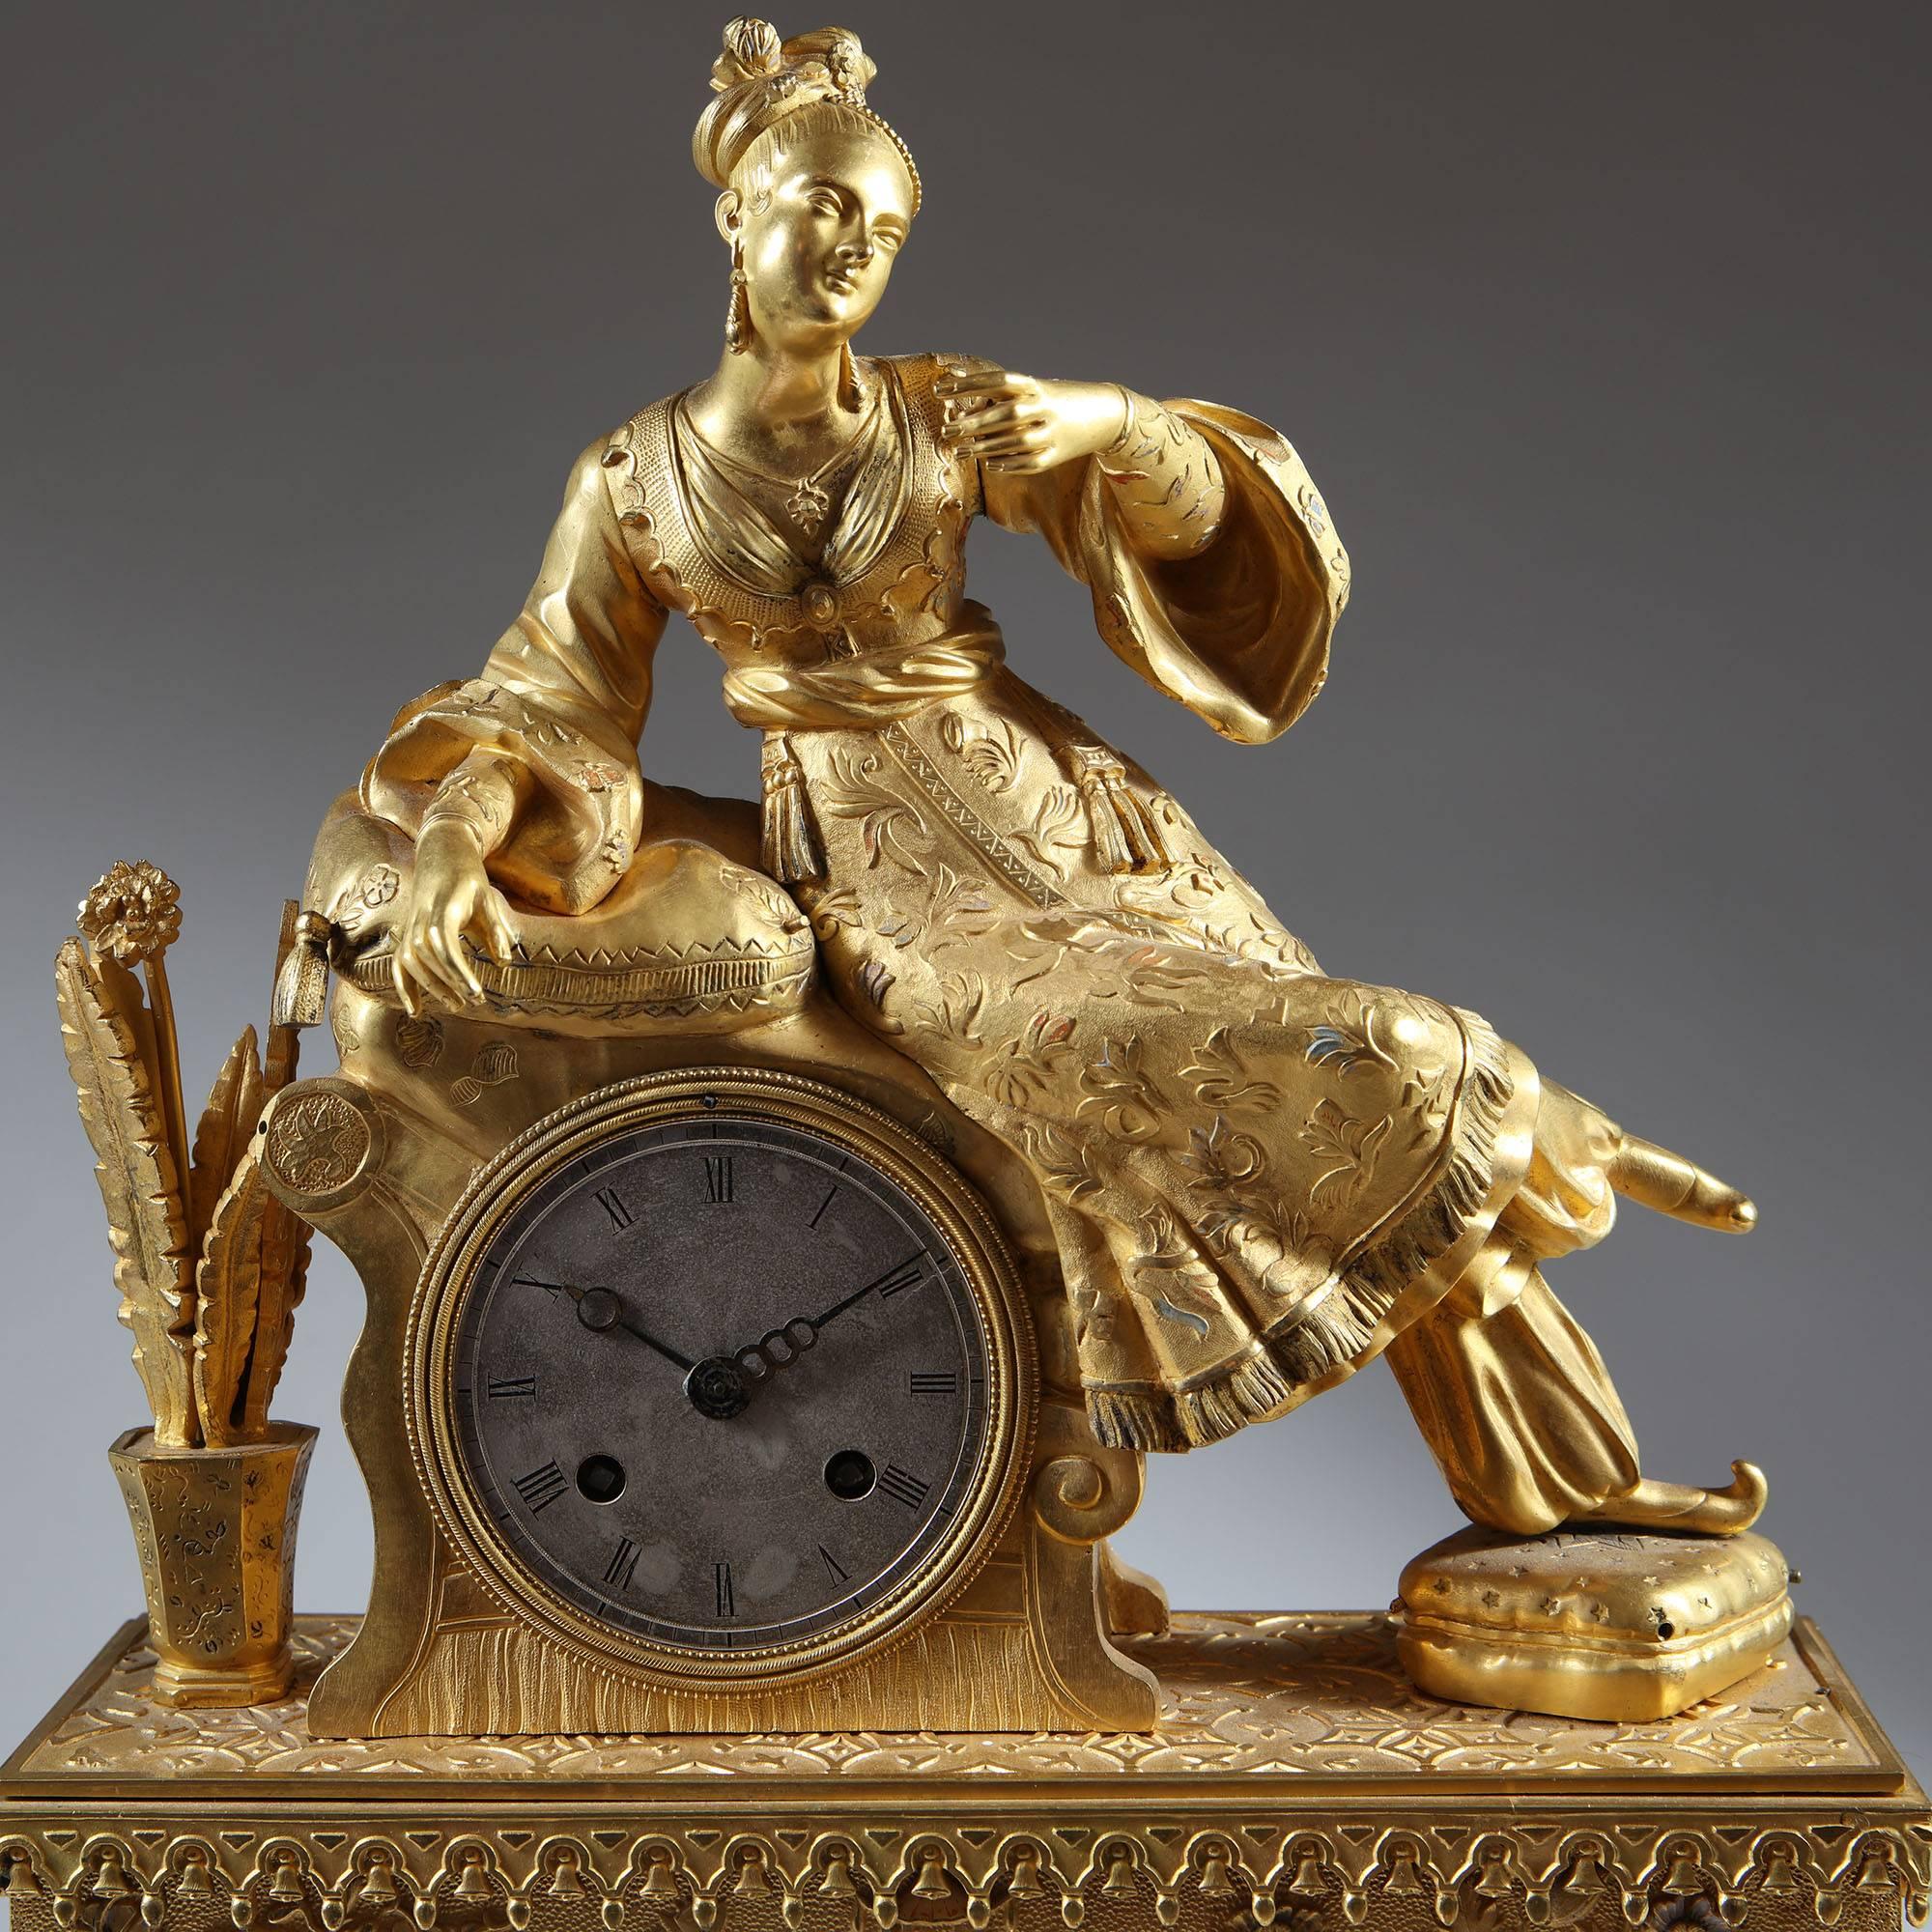 French Gilt Bronze Ottoman Chinoiserie Mantel Clock In Good Condition For Sale In London, by appointment only